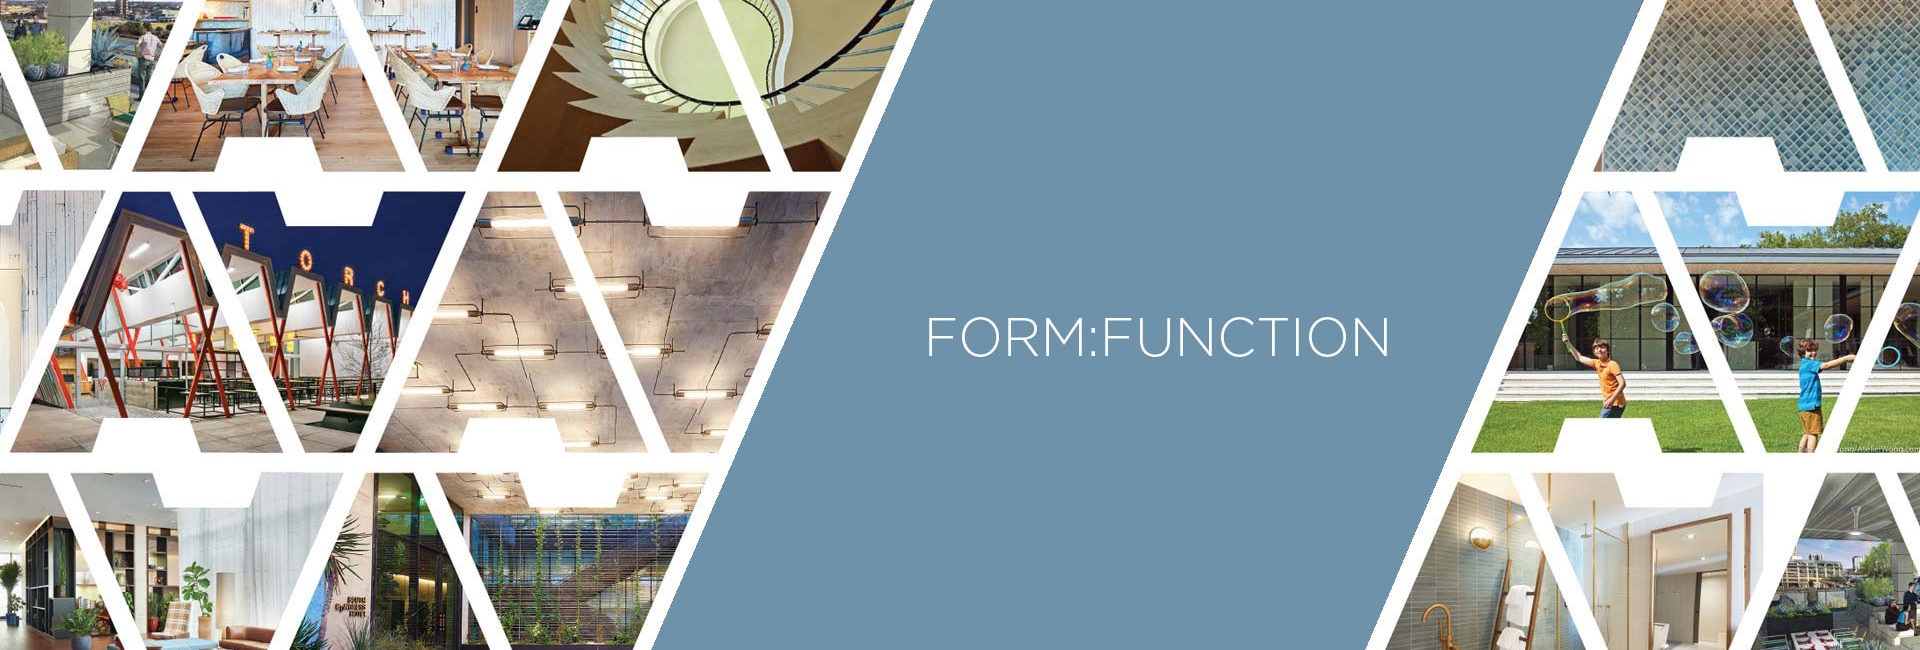 Center for Design ATX • Austin Foundation for Architecture - Form:Function